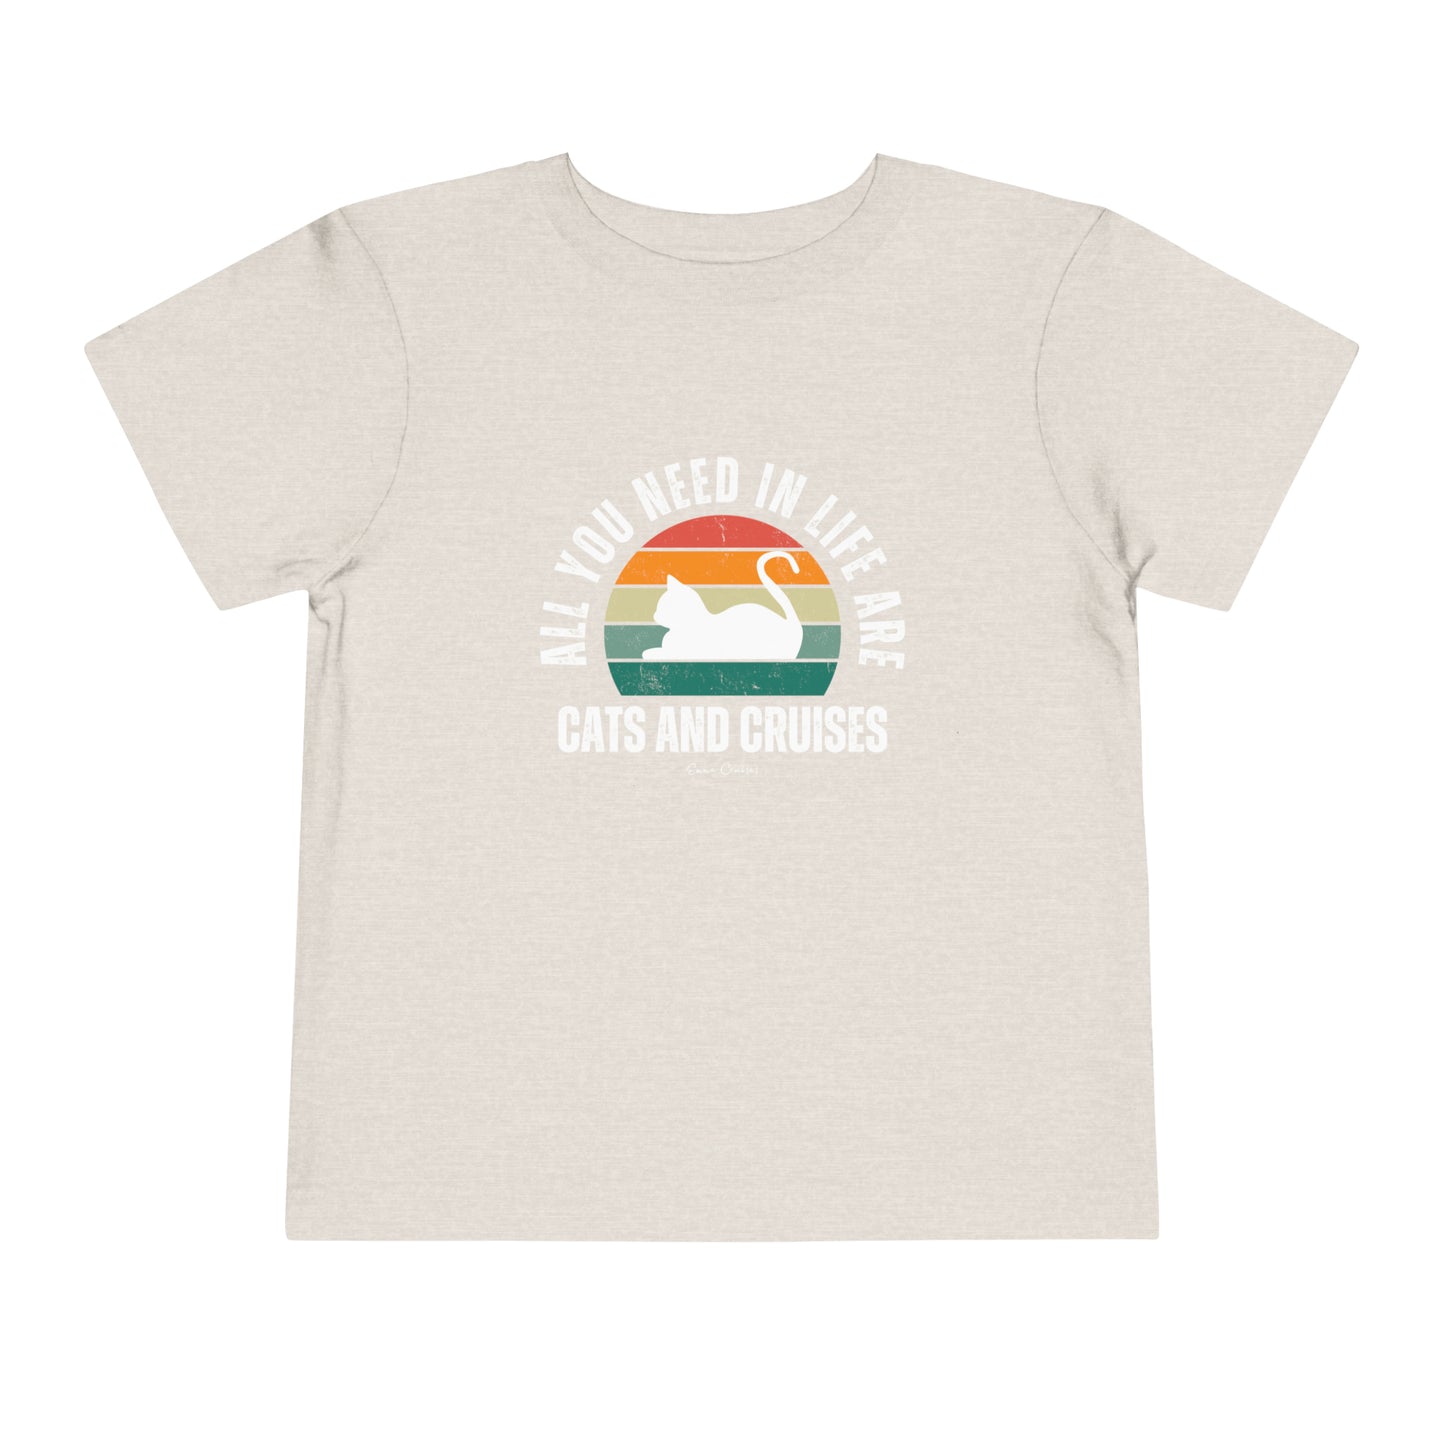 Cats and Cruises - Toddler UNISEX T-Shirt